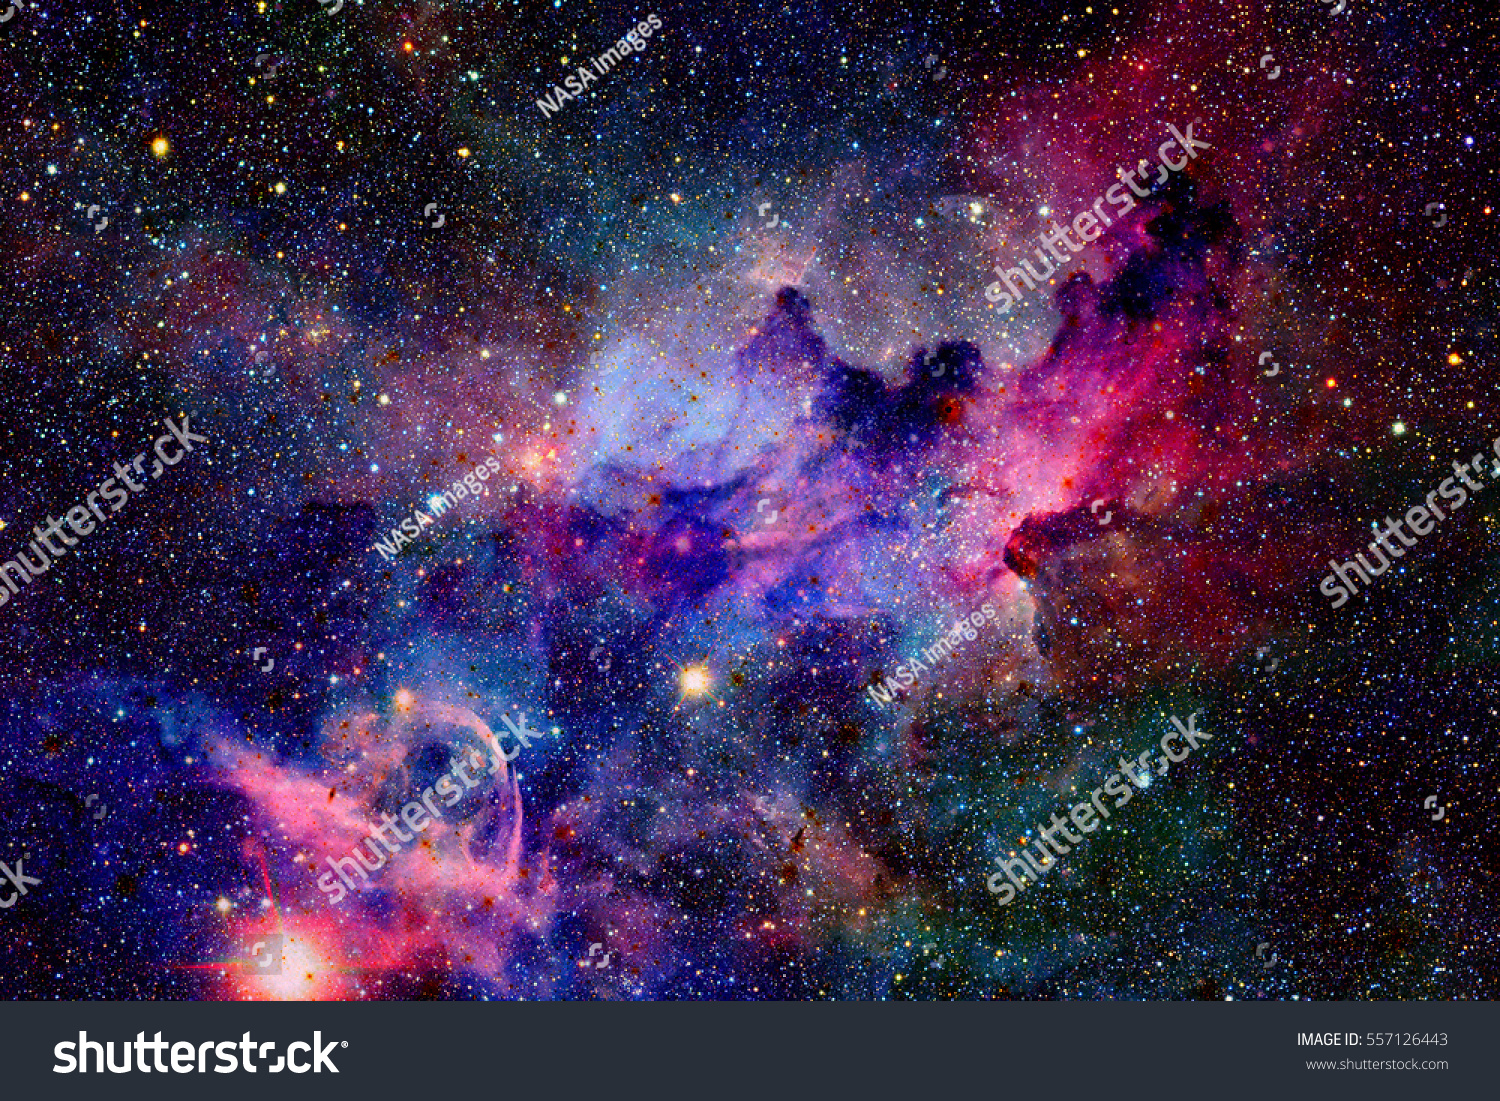 Nebula and galaxies in space. Elements of this image furnished by NASA. #557126443